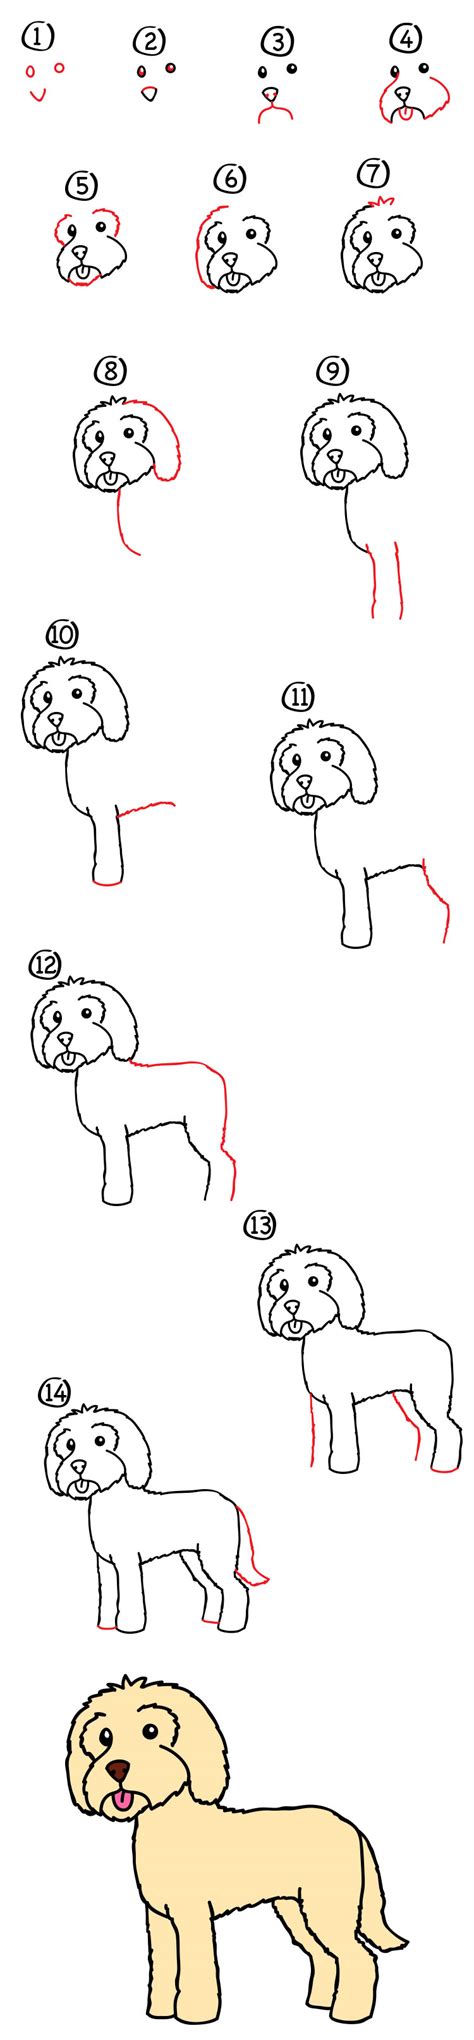 We focus on every detail like dog ears, nose, eyes and even postures. How To Draw A Goldendoodle - Art For Kids Hub